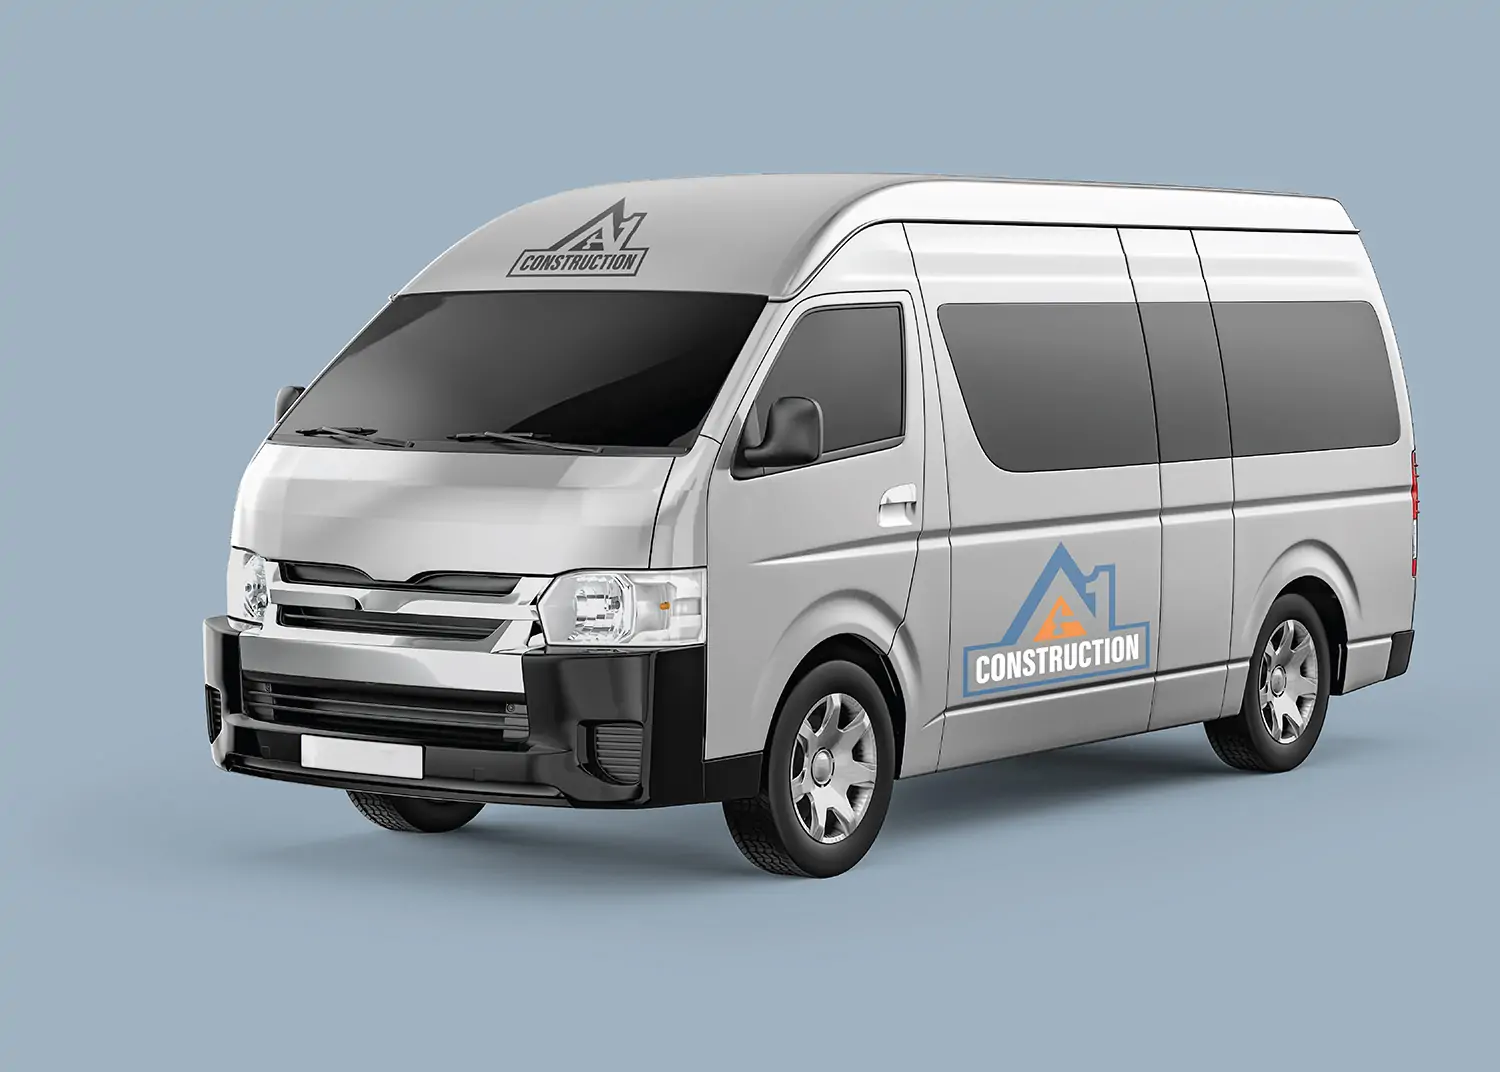 A 3d rendering of a white delivery van with blue and grey "construction" company logos on the side, parked against a light blue background.